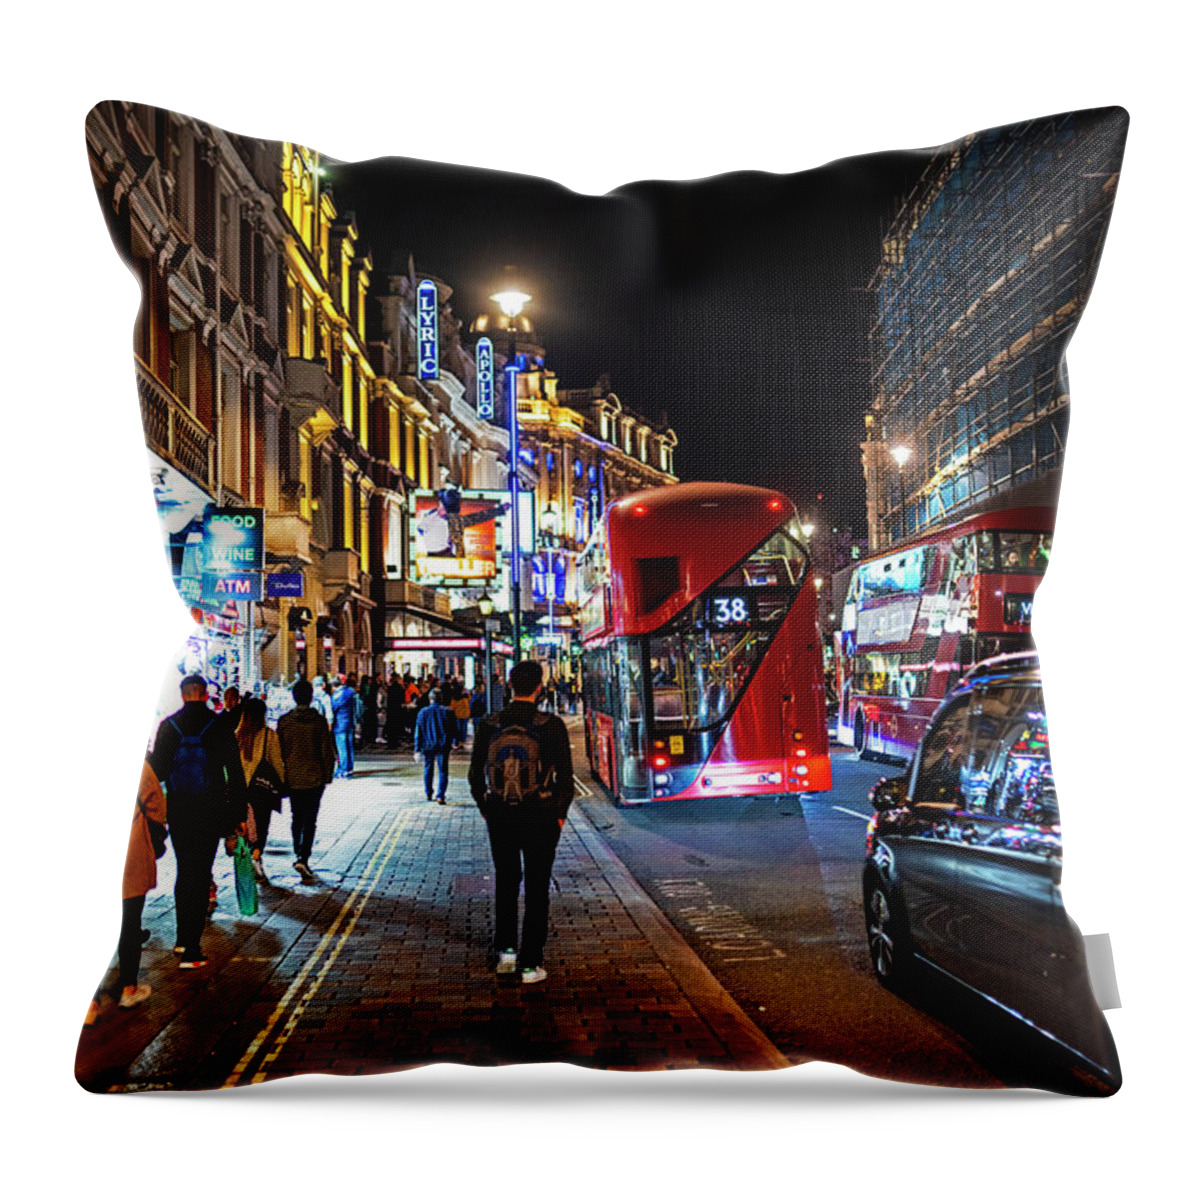 London Throw Pillow featuring the photograph London England Nightlife Shaftesbury Avenue London England by Toby McGuire